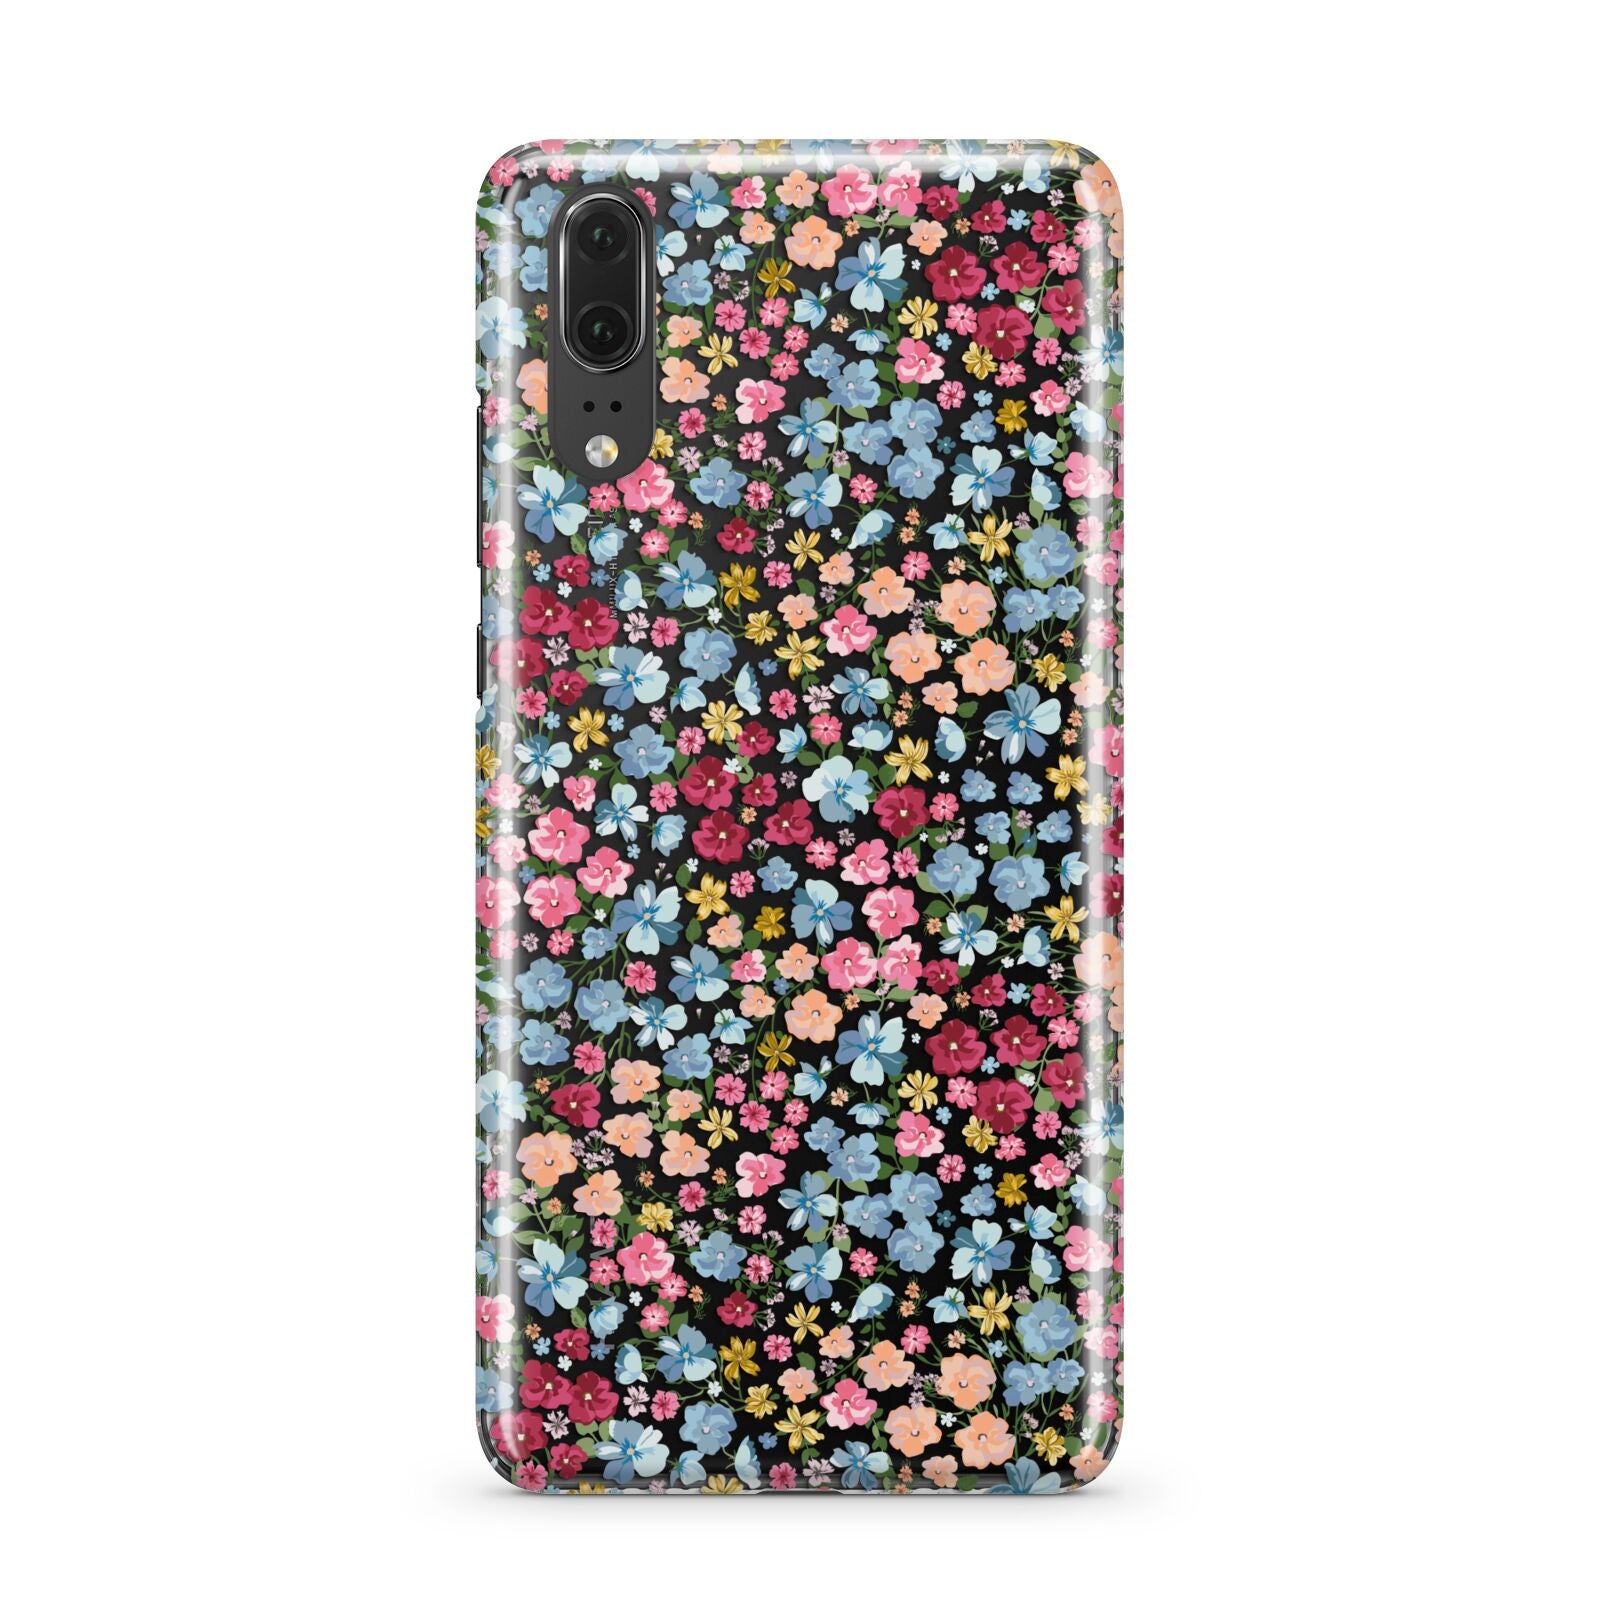 Floral Meadow Huawei P20 Phone Case